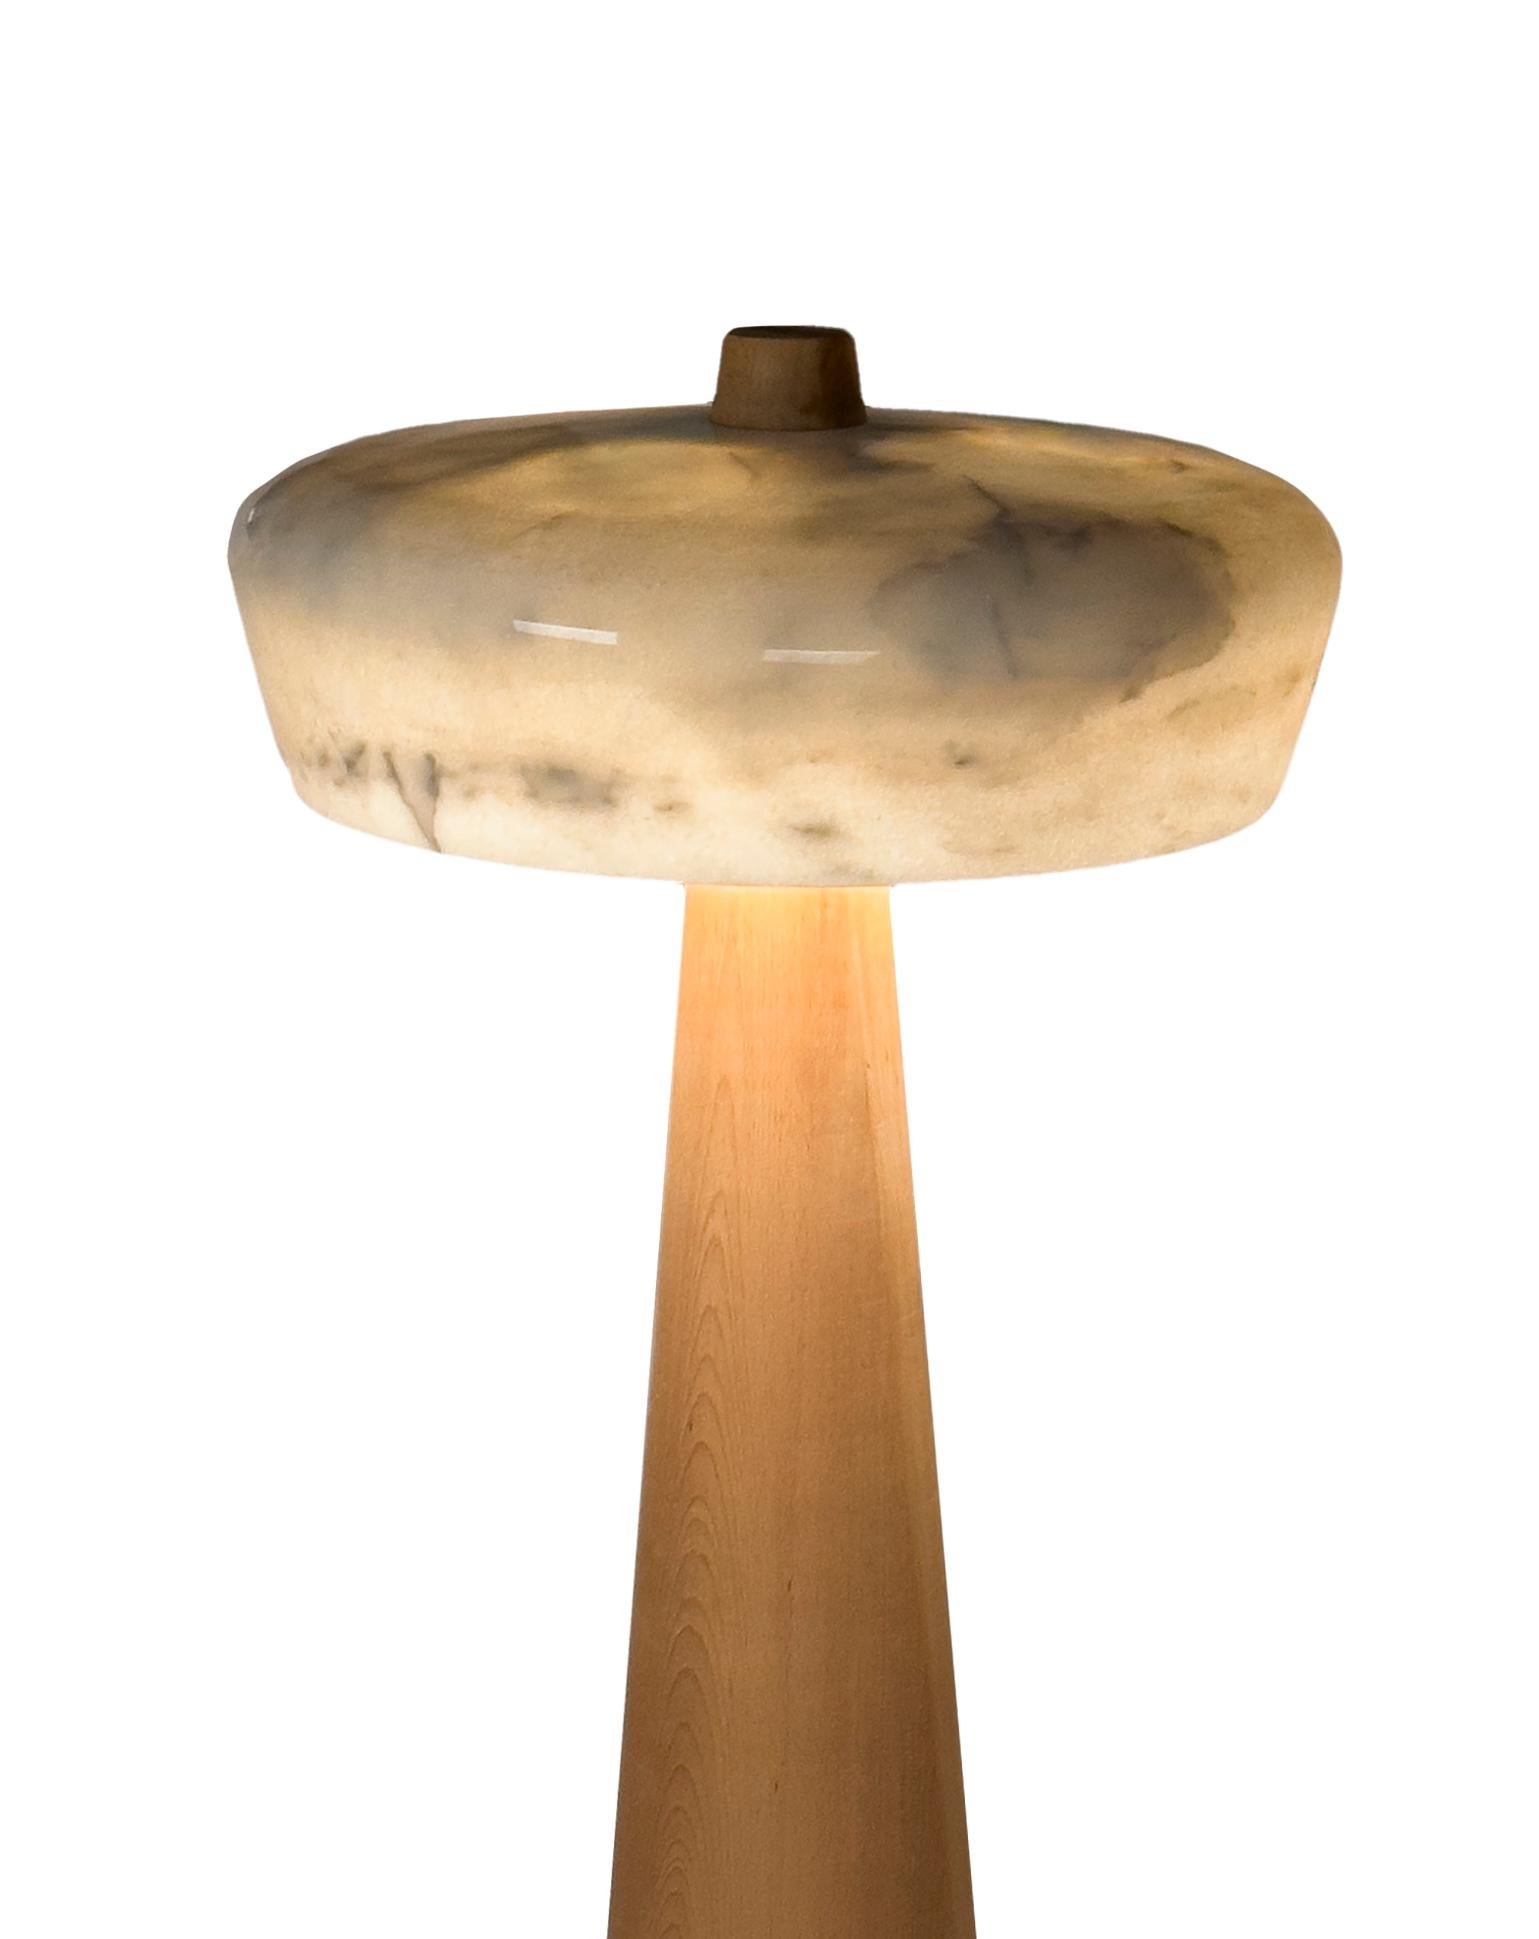 TOTEM floor lamp. A modern design statement with a subtle Pharaonic flavor.

Designed and handmade in Egypt using traditional methods of craftsmanship. 
Base in solid oak, offered in natural, walnut or black stain. Also available in custom colors